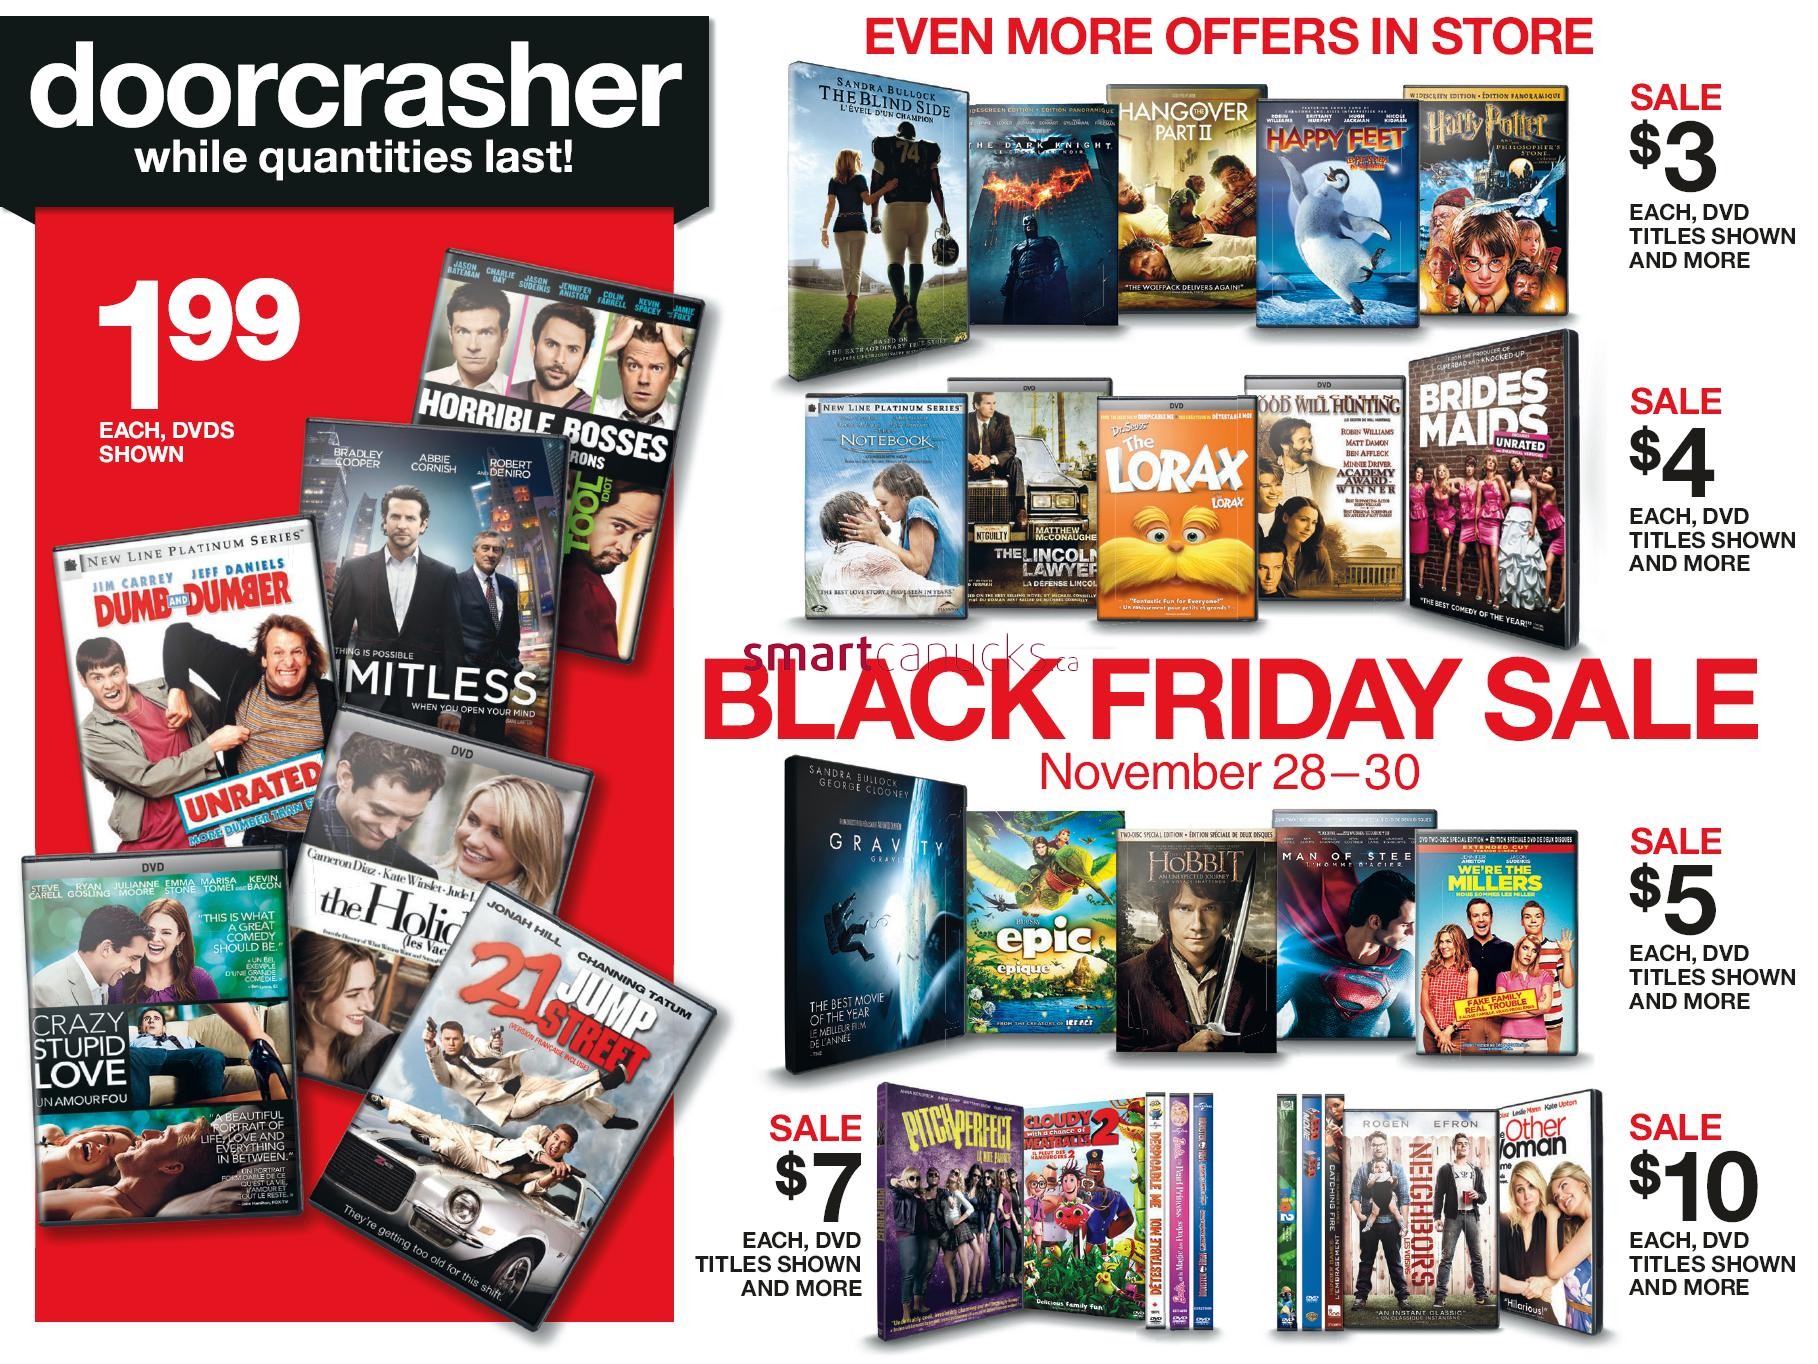 Target Black Friday Canada 2014 Flyer, Sales and Deals › Black Friday Canada